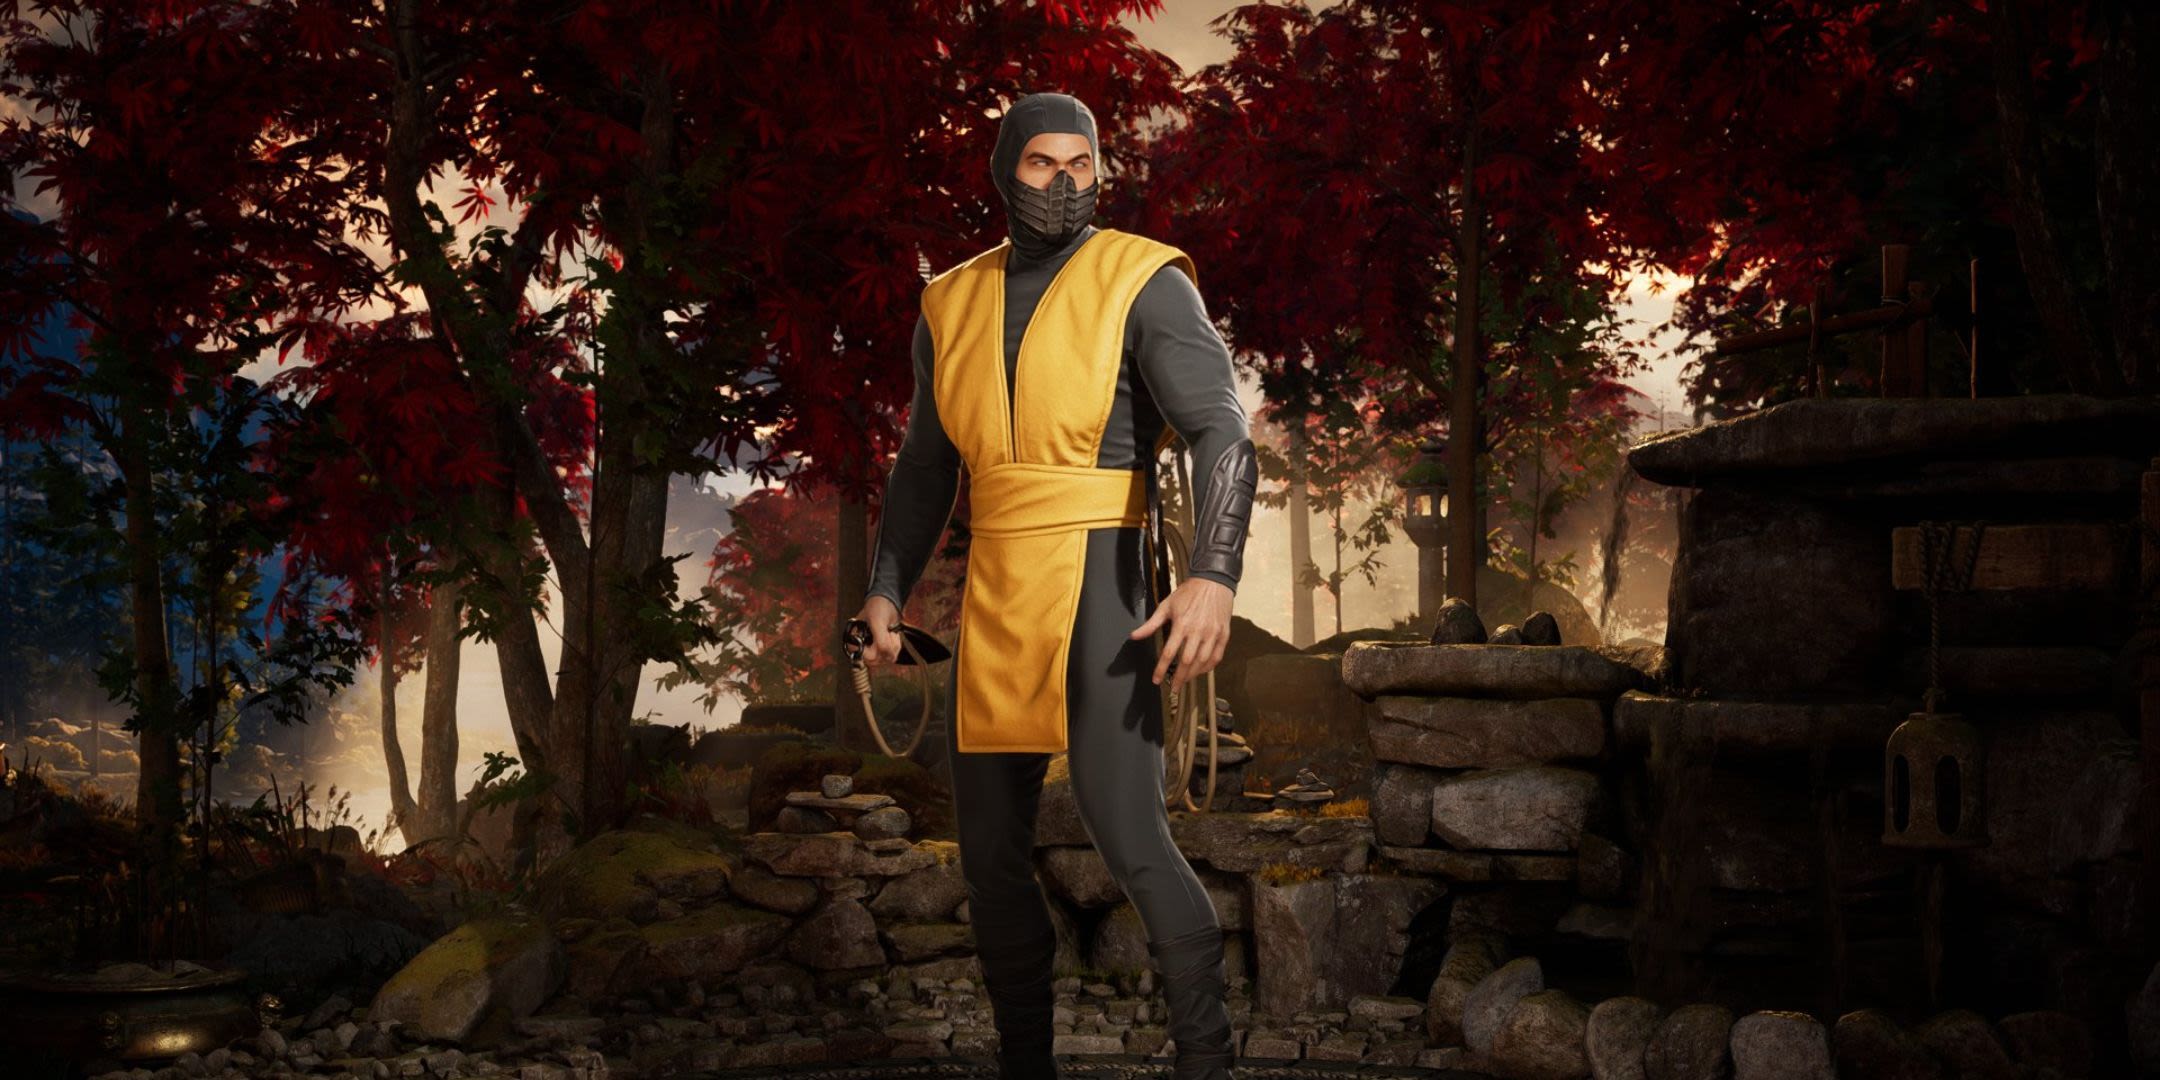 Mortal Kombat 1 Is Adding A Skin For Scorpion Based On The Iconic '90s Movie